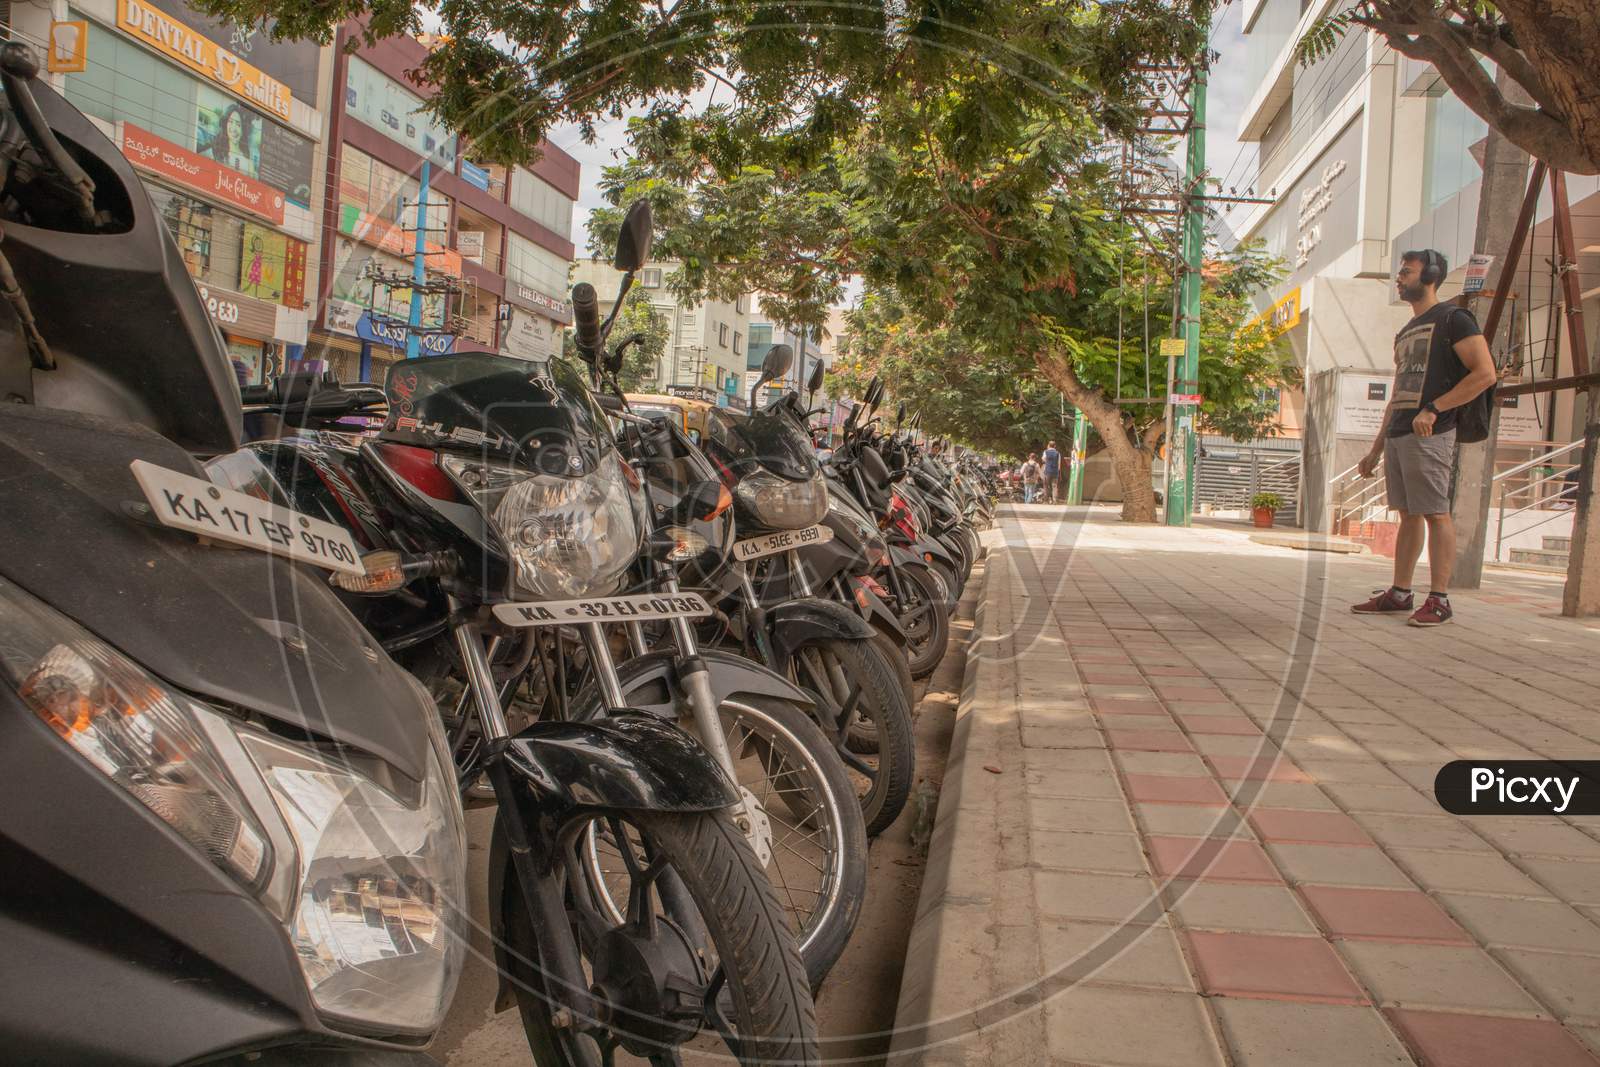 Bengaluru, India June 17, 2019 : A Lot Of Motor Scooters Parked In A Row On Road At Bengaluru, India